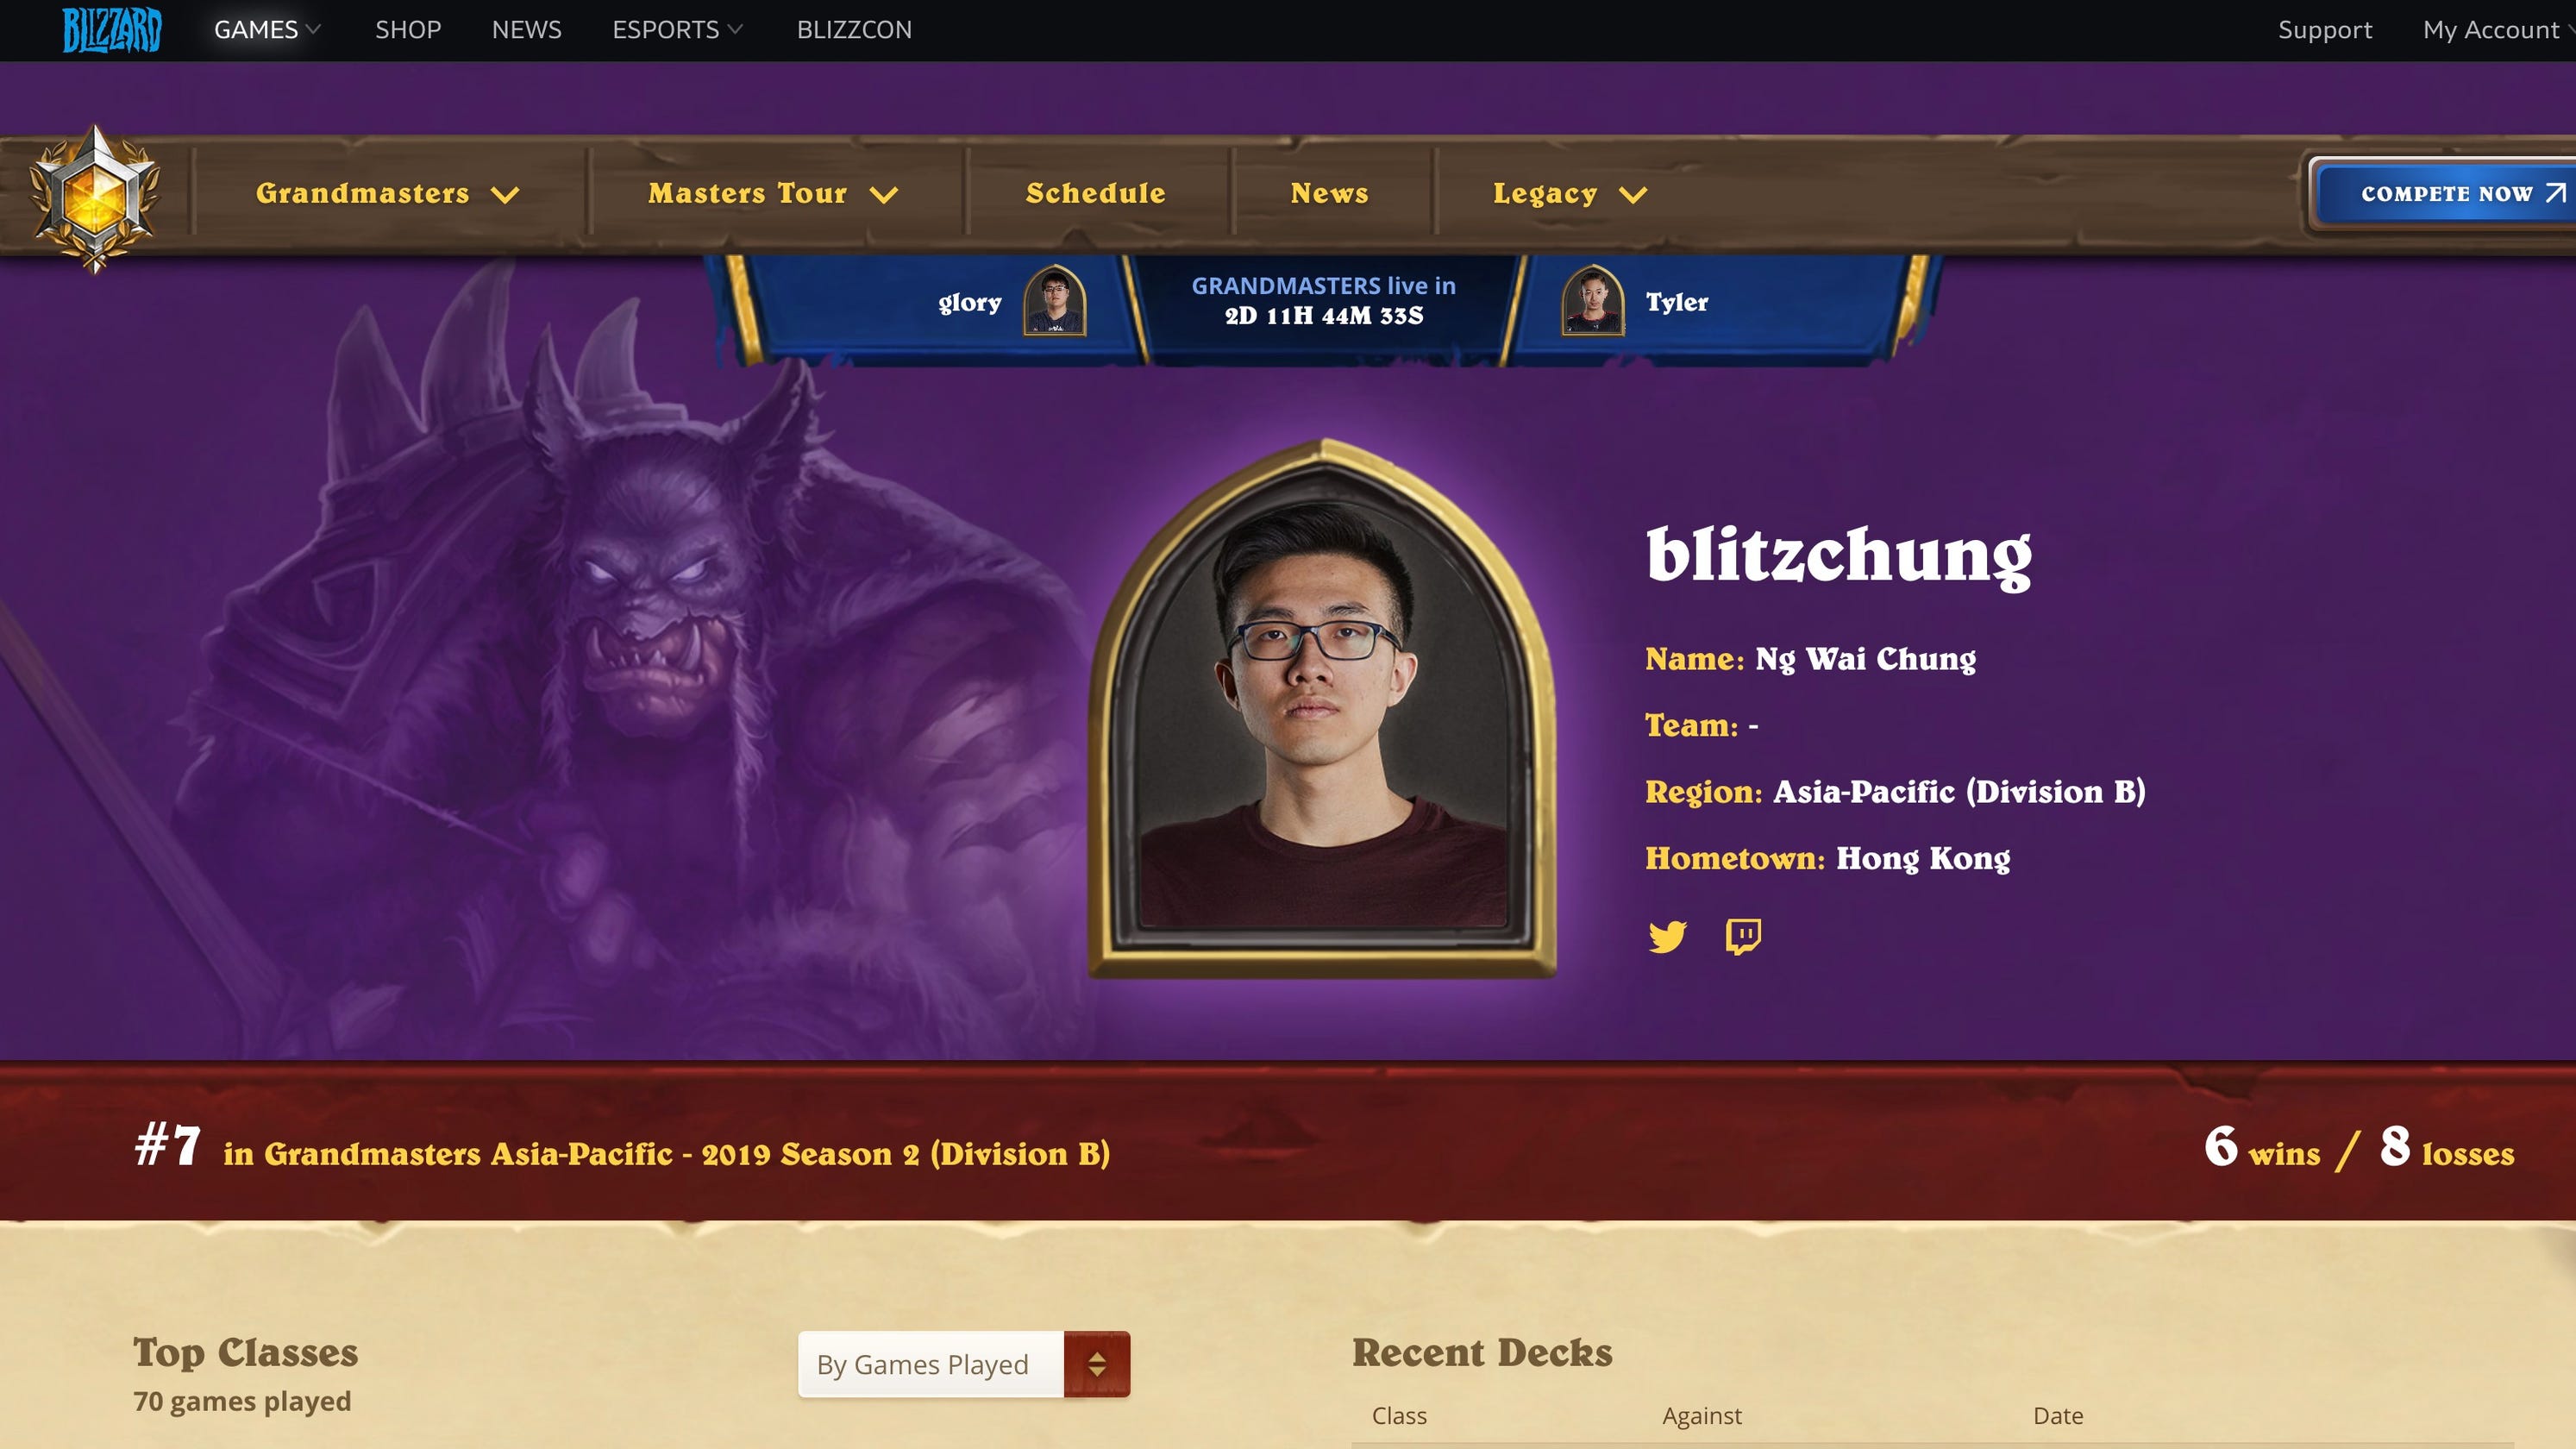 Whats On TV Blizzard suspends ‘Hearthstone’ esports athlete after his pro-Hong Kong plea on livestream